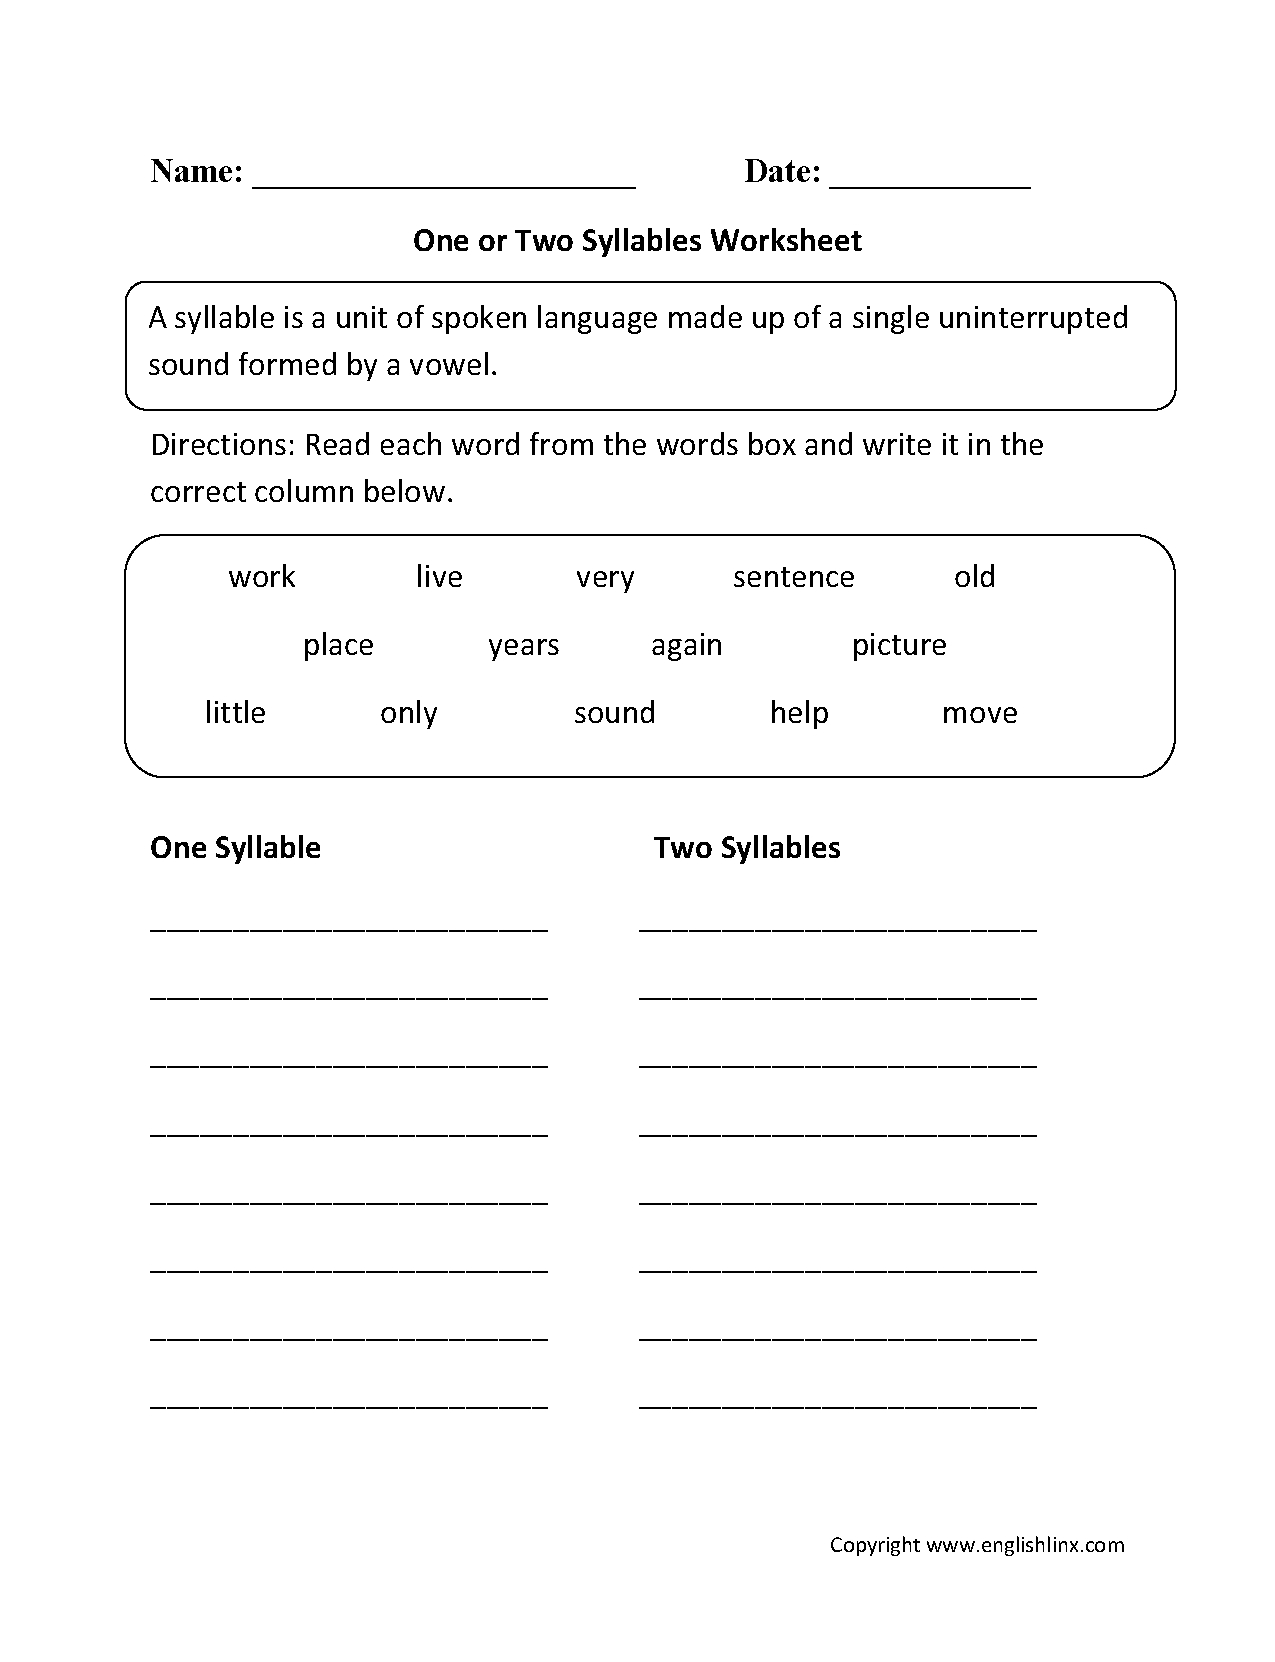 Syllables Worksheets  One Or Two Syllables Worksheet